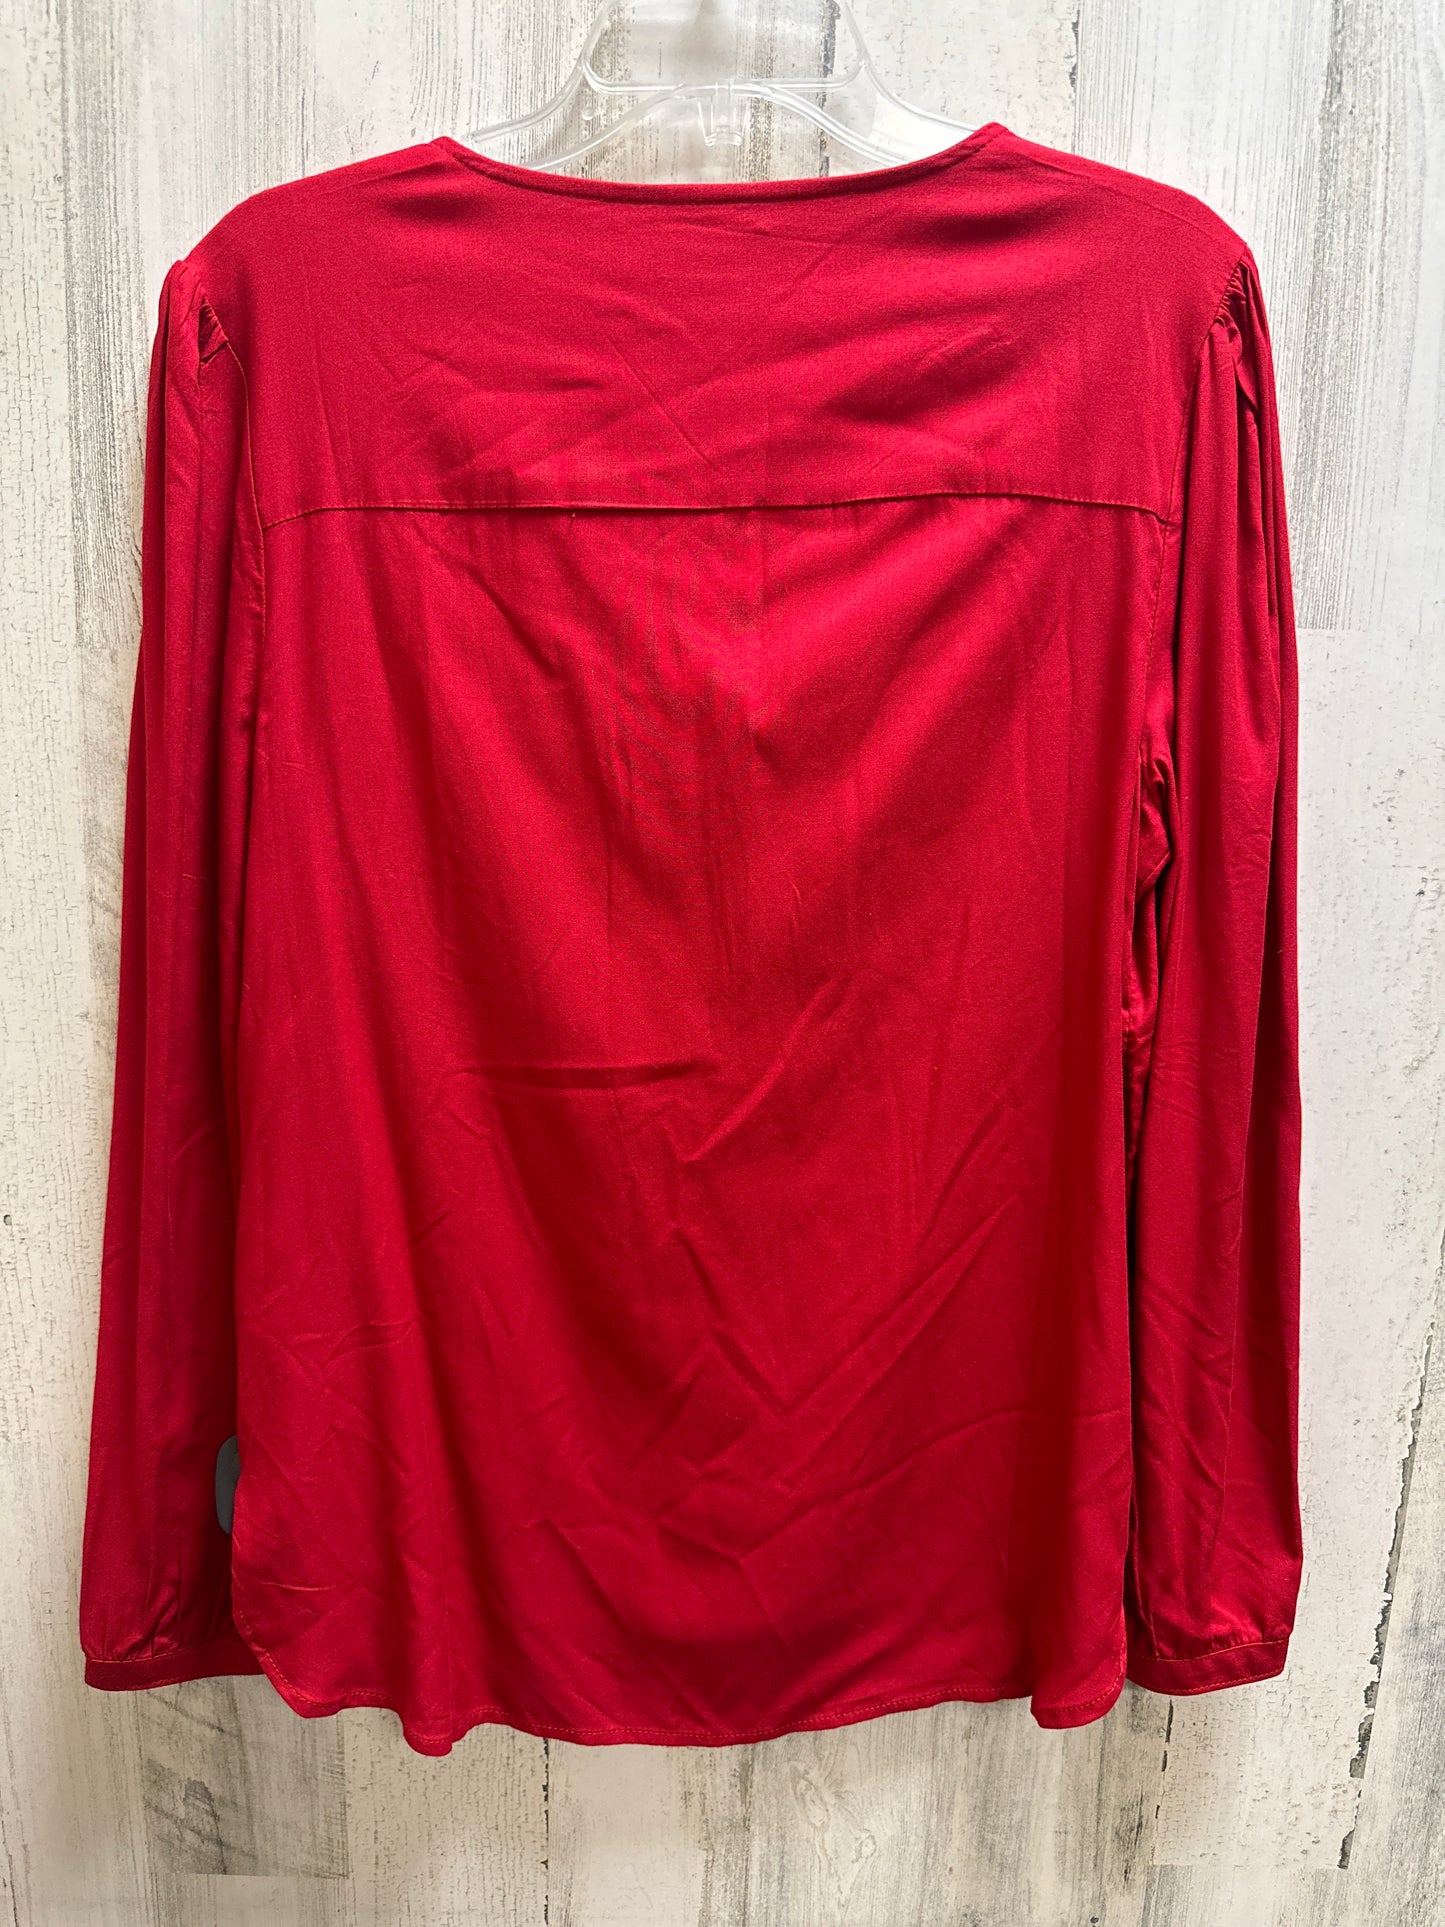 Top Long Sleeve By True Religion  Size: L